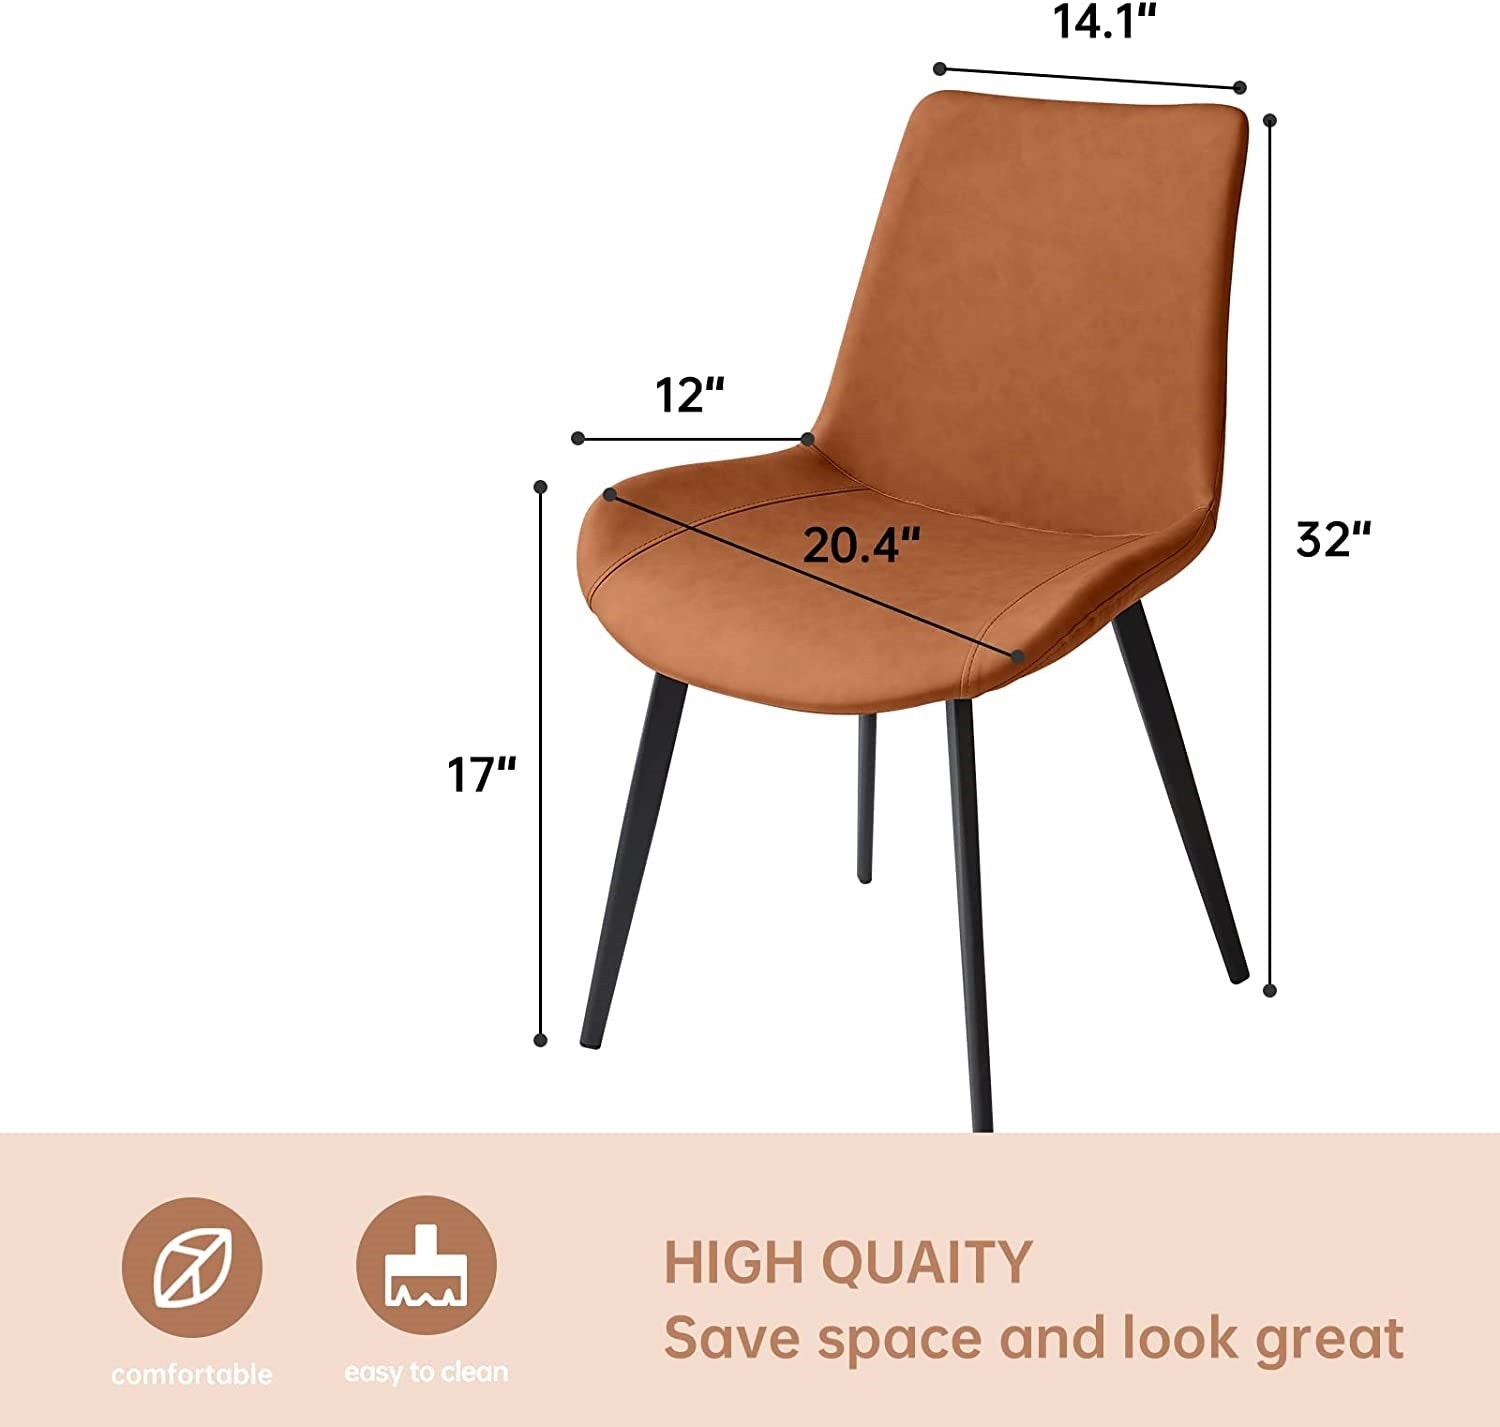 HIPIHOM Dining Chairs | HOG - Home. Office. Garden online marketplace